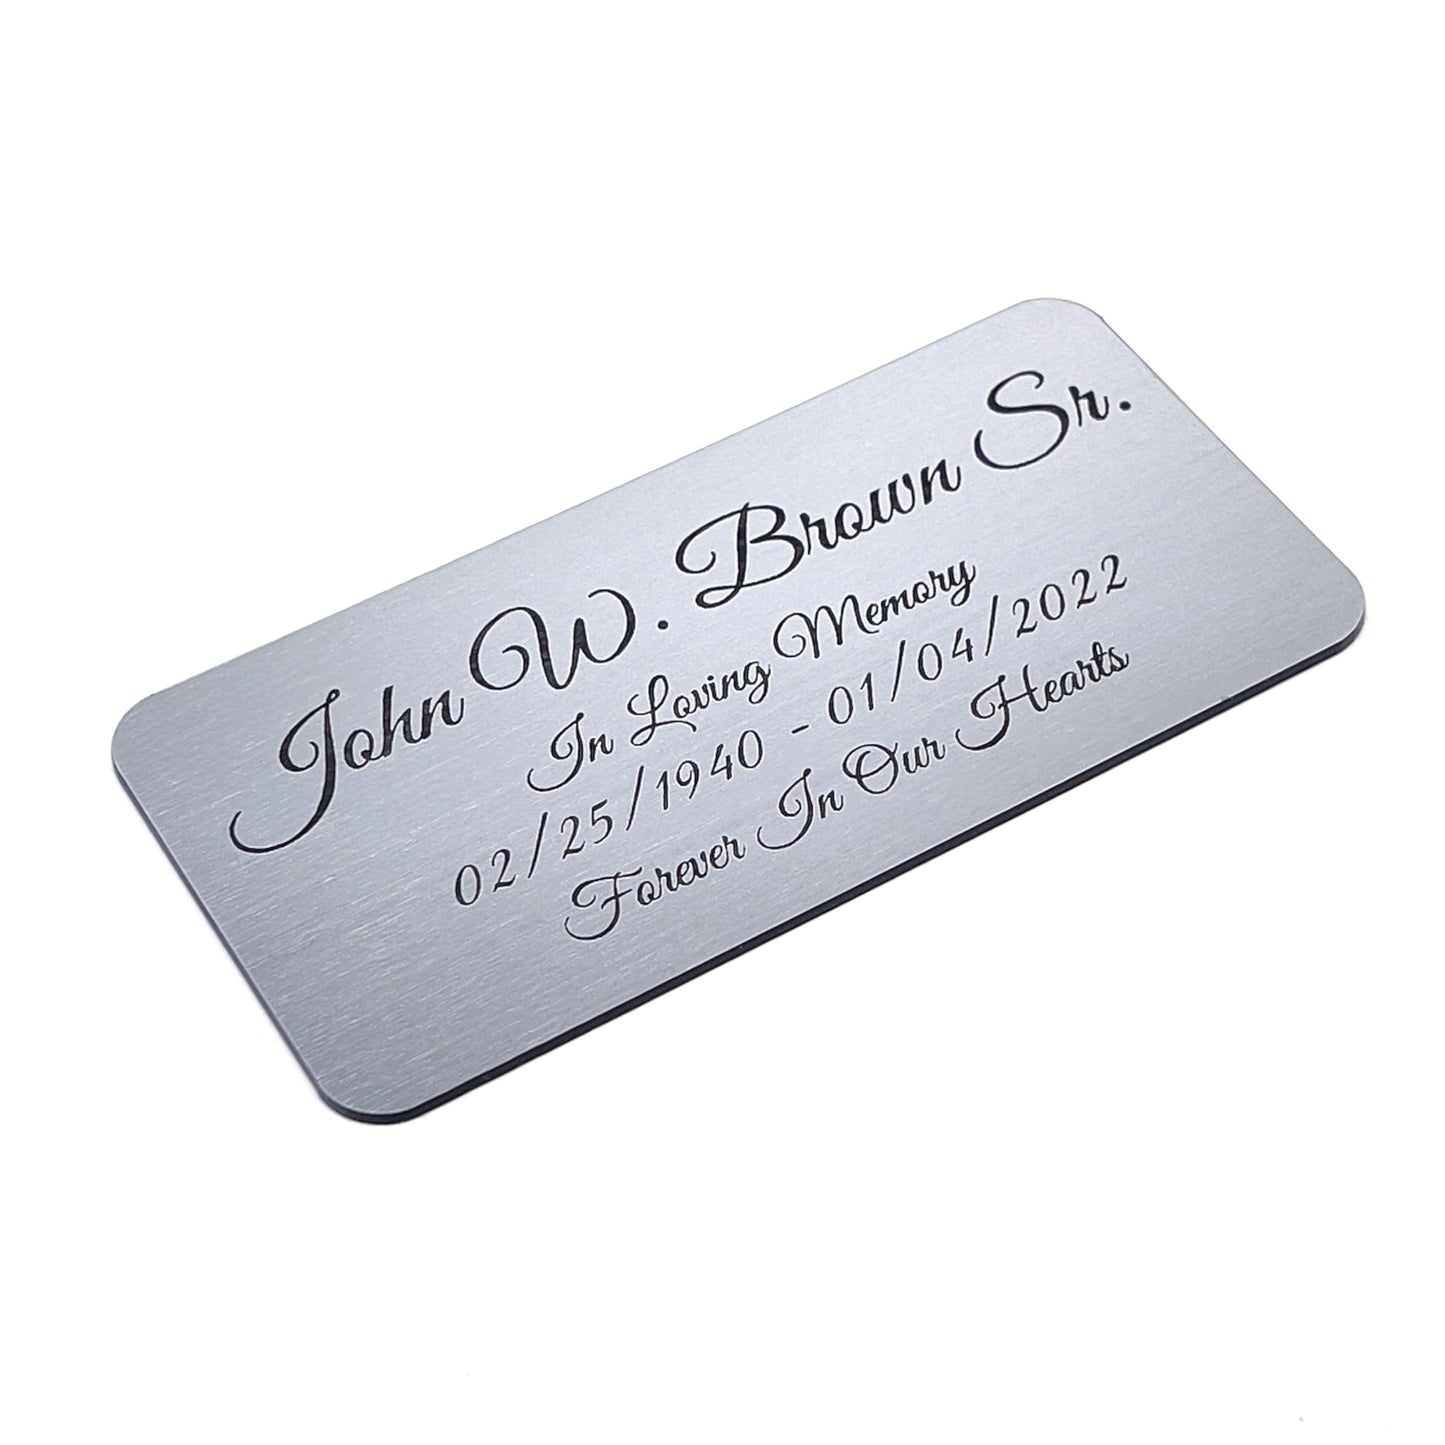 Engraved Name Plate, Personalized Name Plaque - 2x4, 2x6, 2x8, 3x6-21 Colors, 3Corner Styles, 17 Fonts Styles, Name Plates for URN, Trophy, Picture